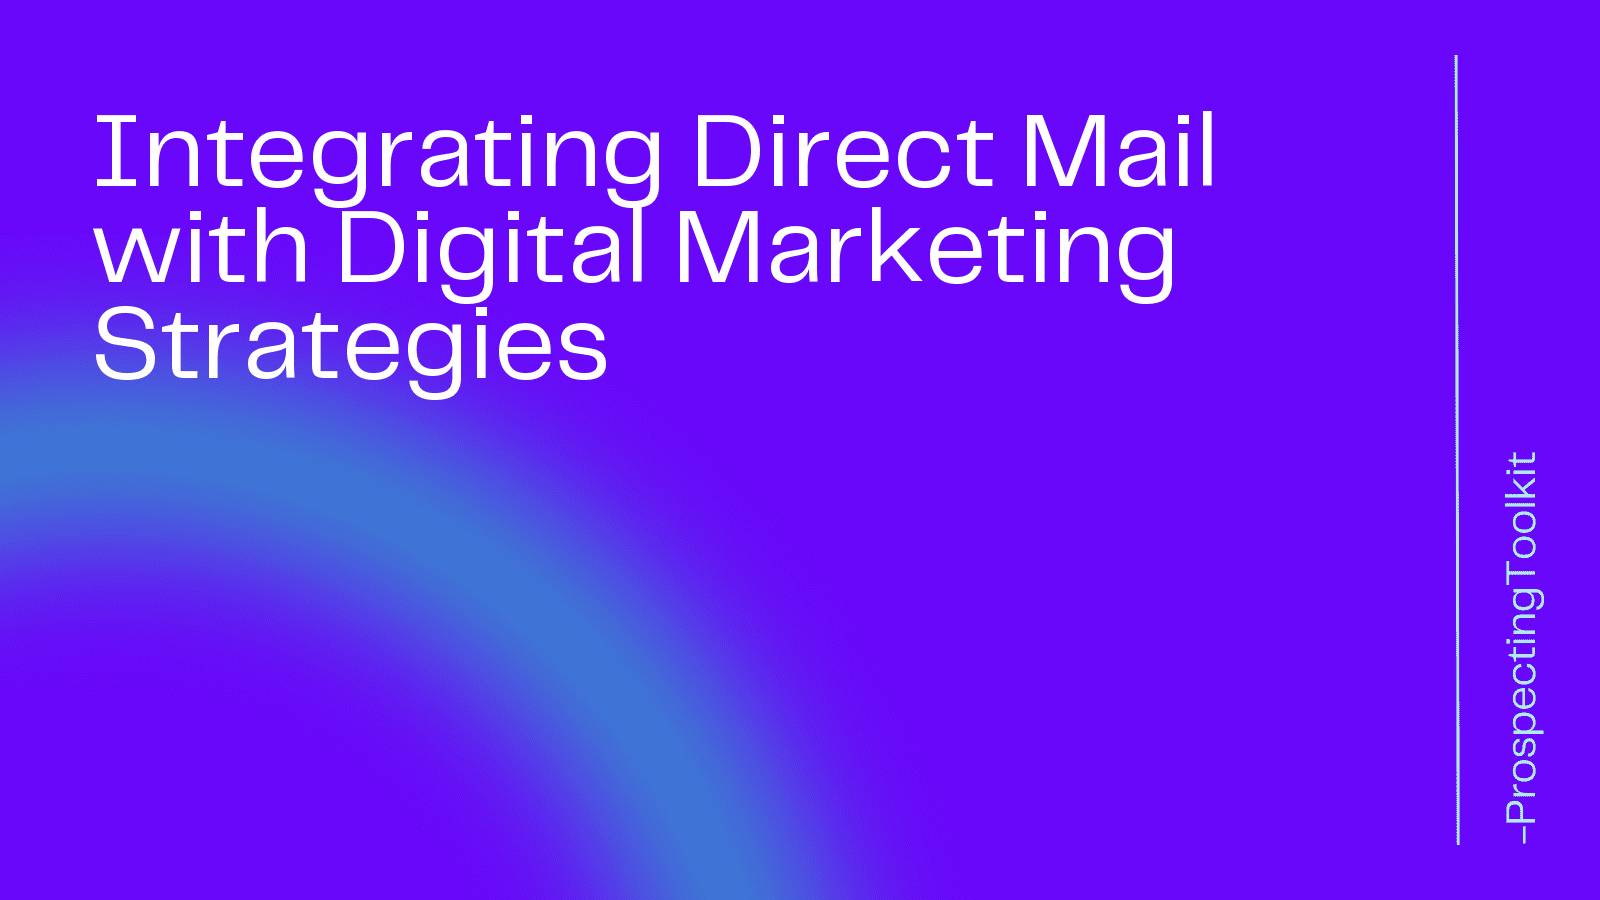 Integrating Direct Mail with Digital Marketing Strategies